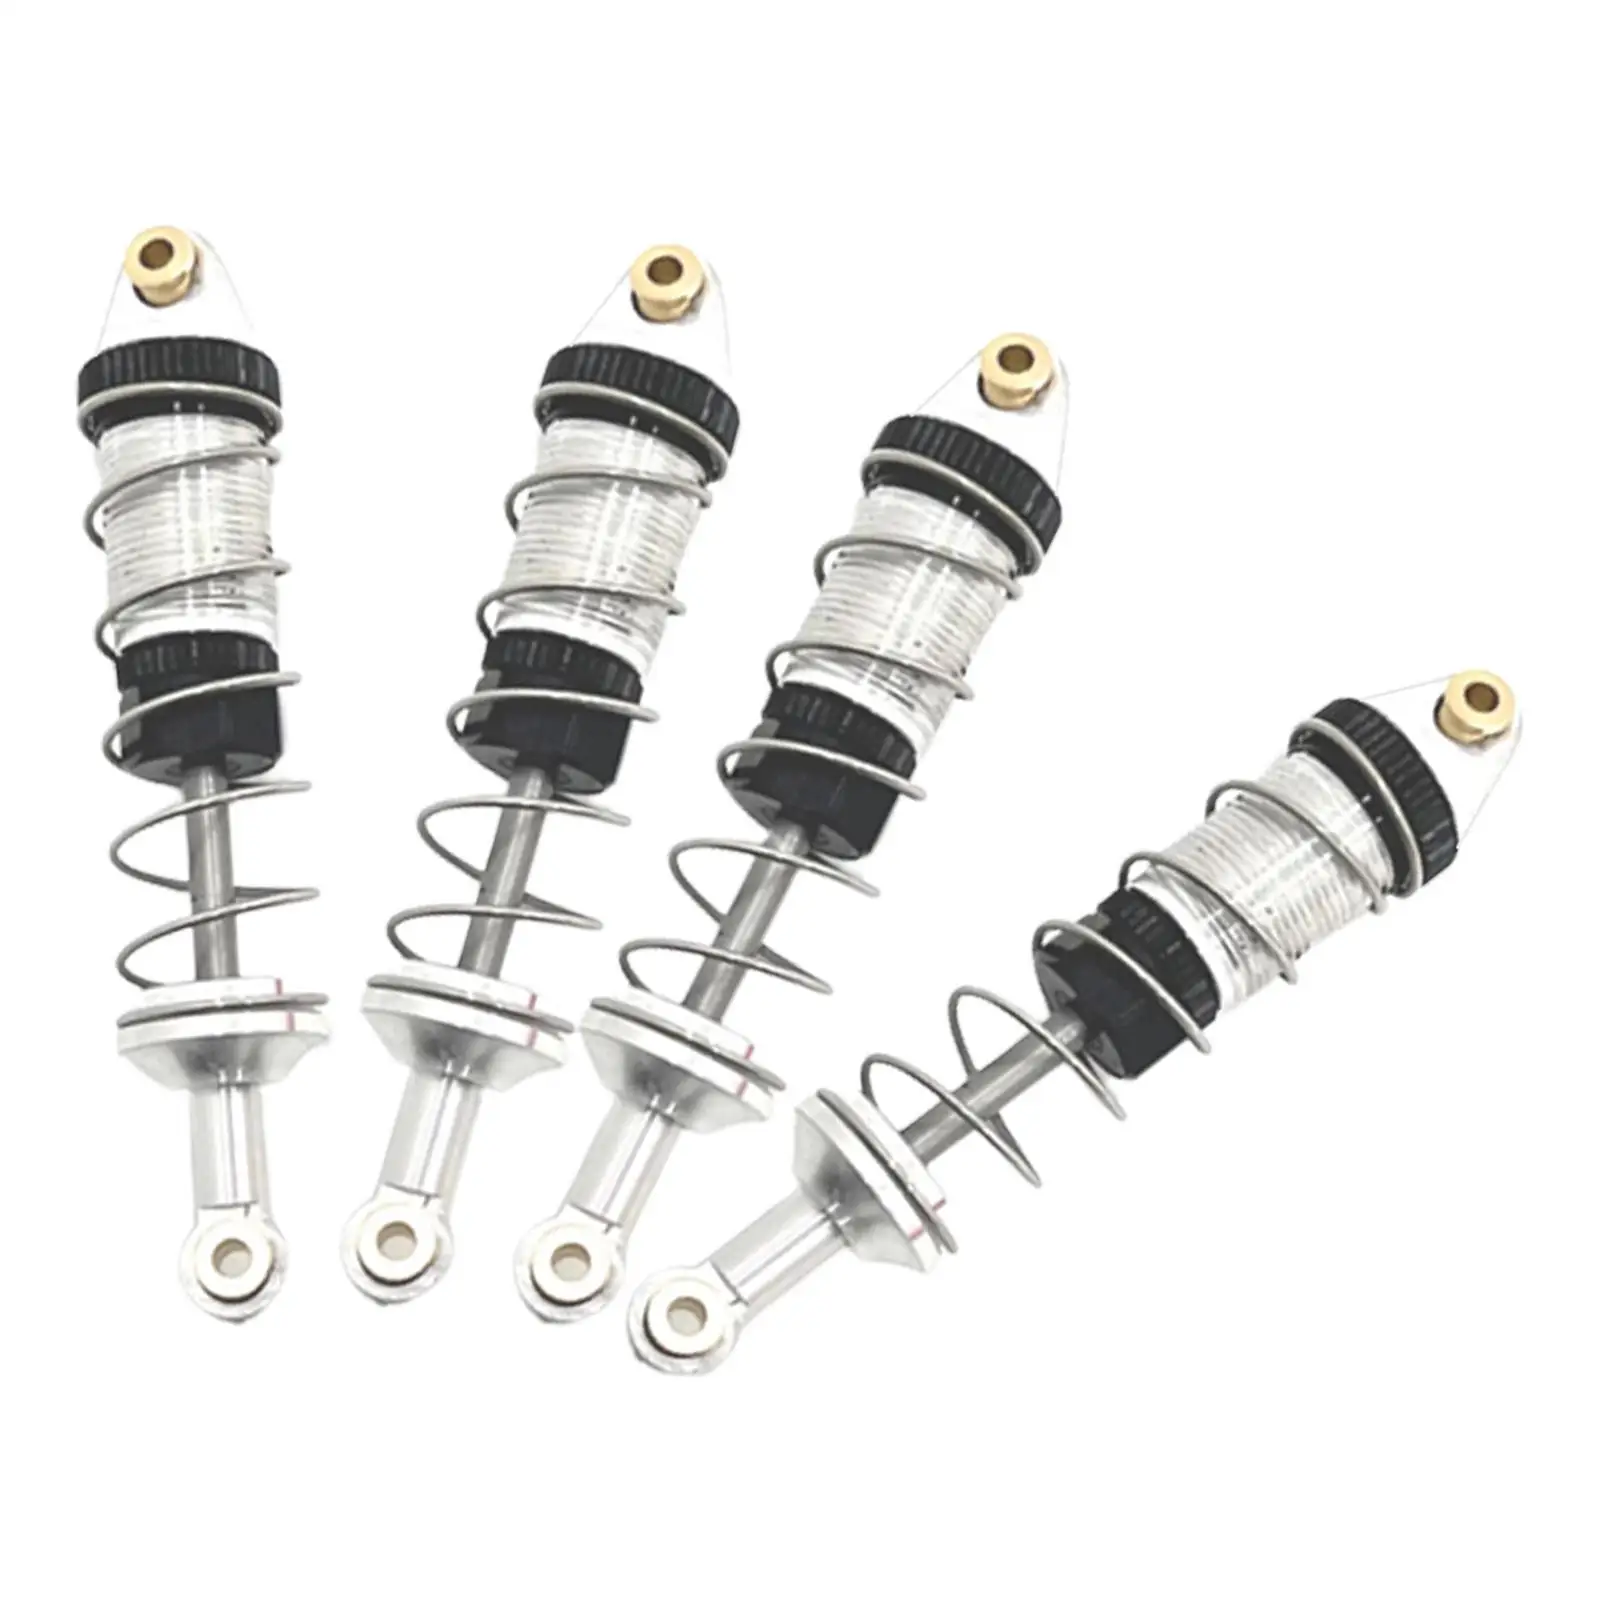 4Pcs RC Shock Absorber Front and Rear RC Shocks Damper Replacement Parts for 16207 16208 16209 1/16 Scale Model Vehicles